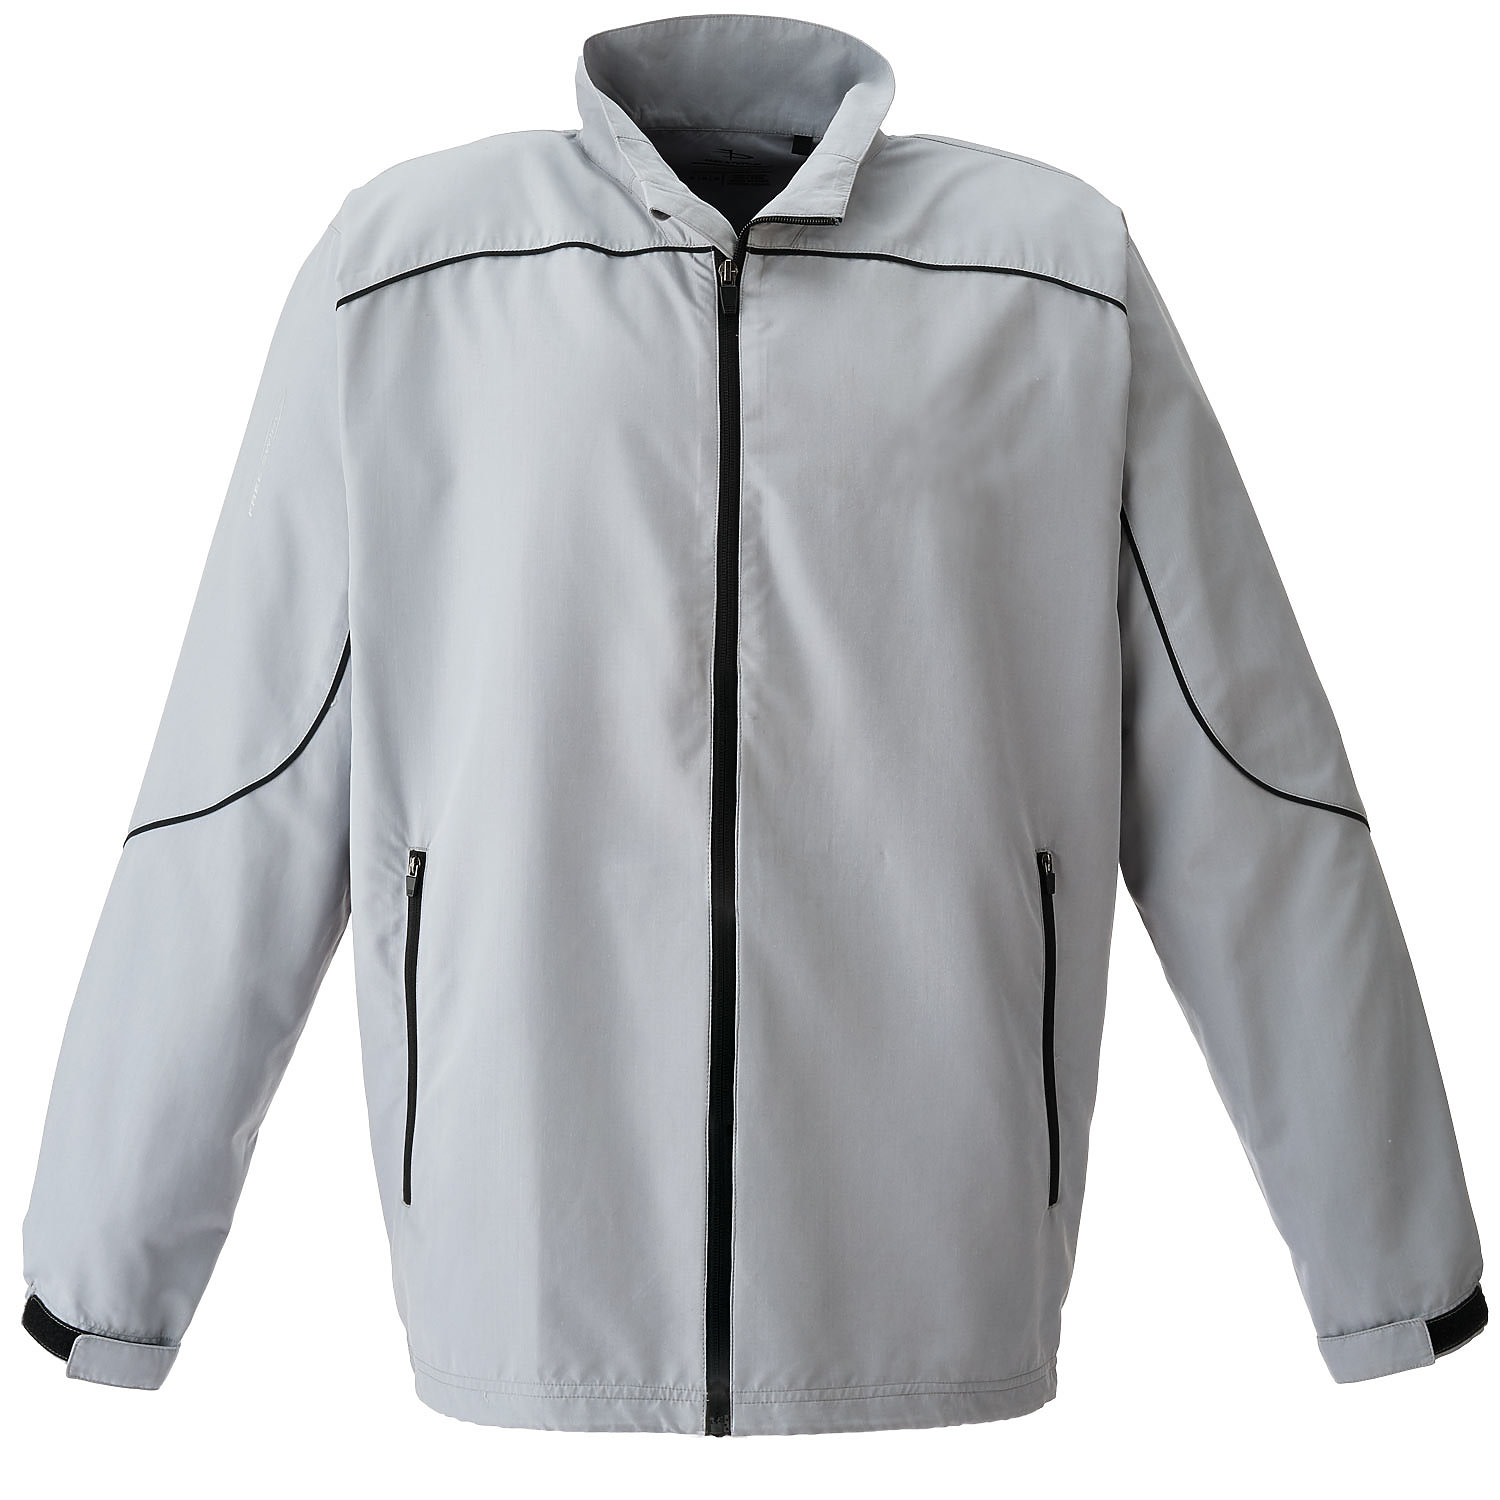 Page & Tuttle P1988 - Men's Piped Full-Zip Long Sleeve Windshirt